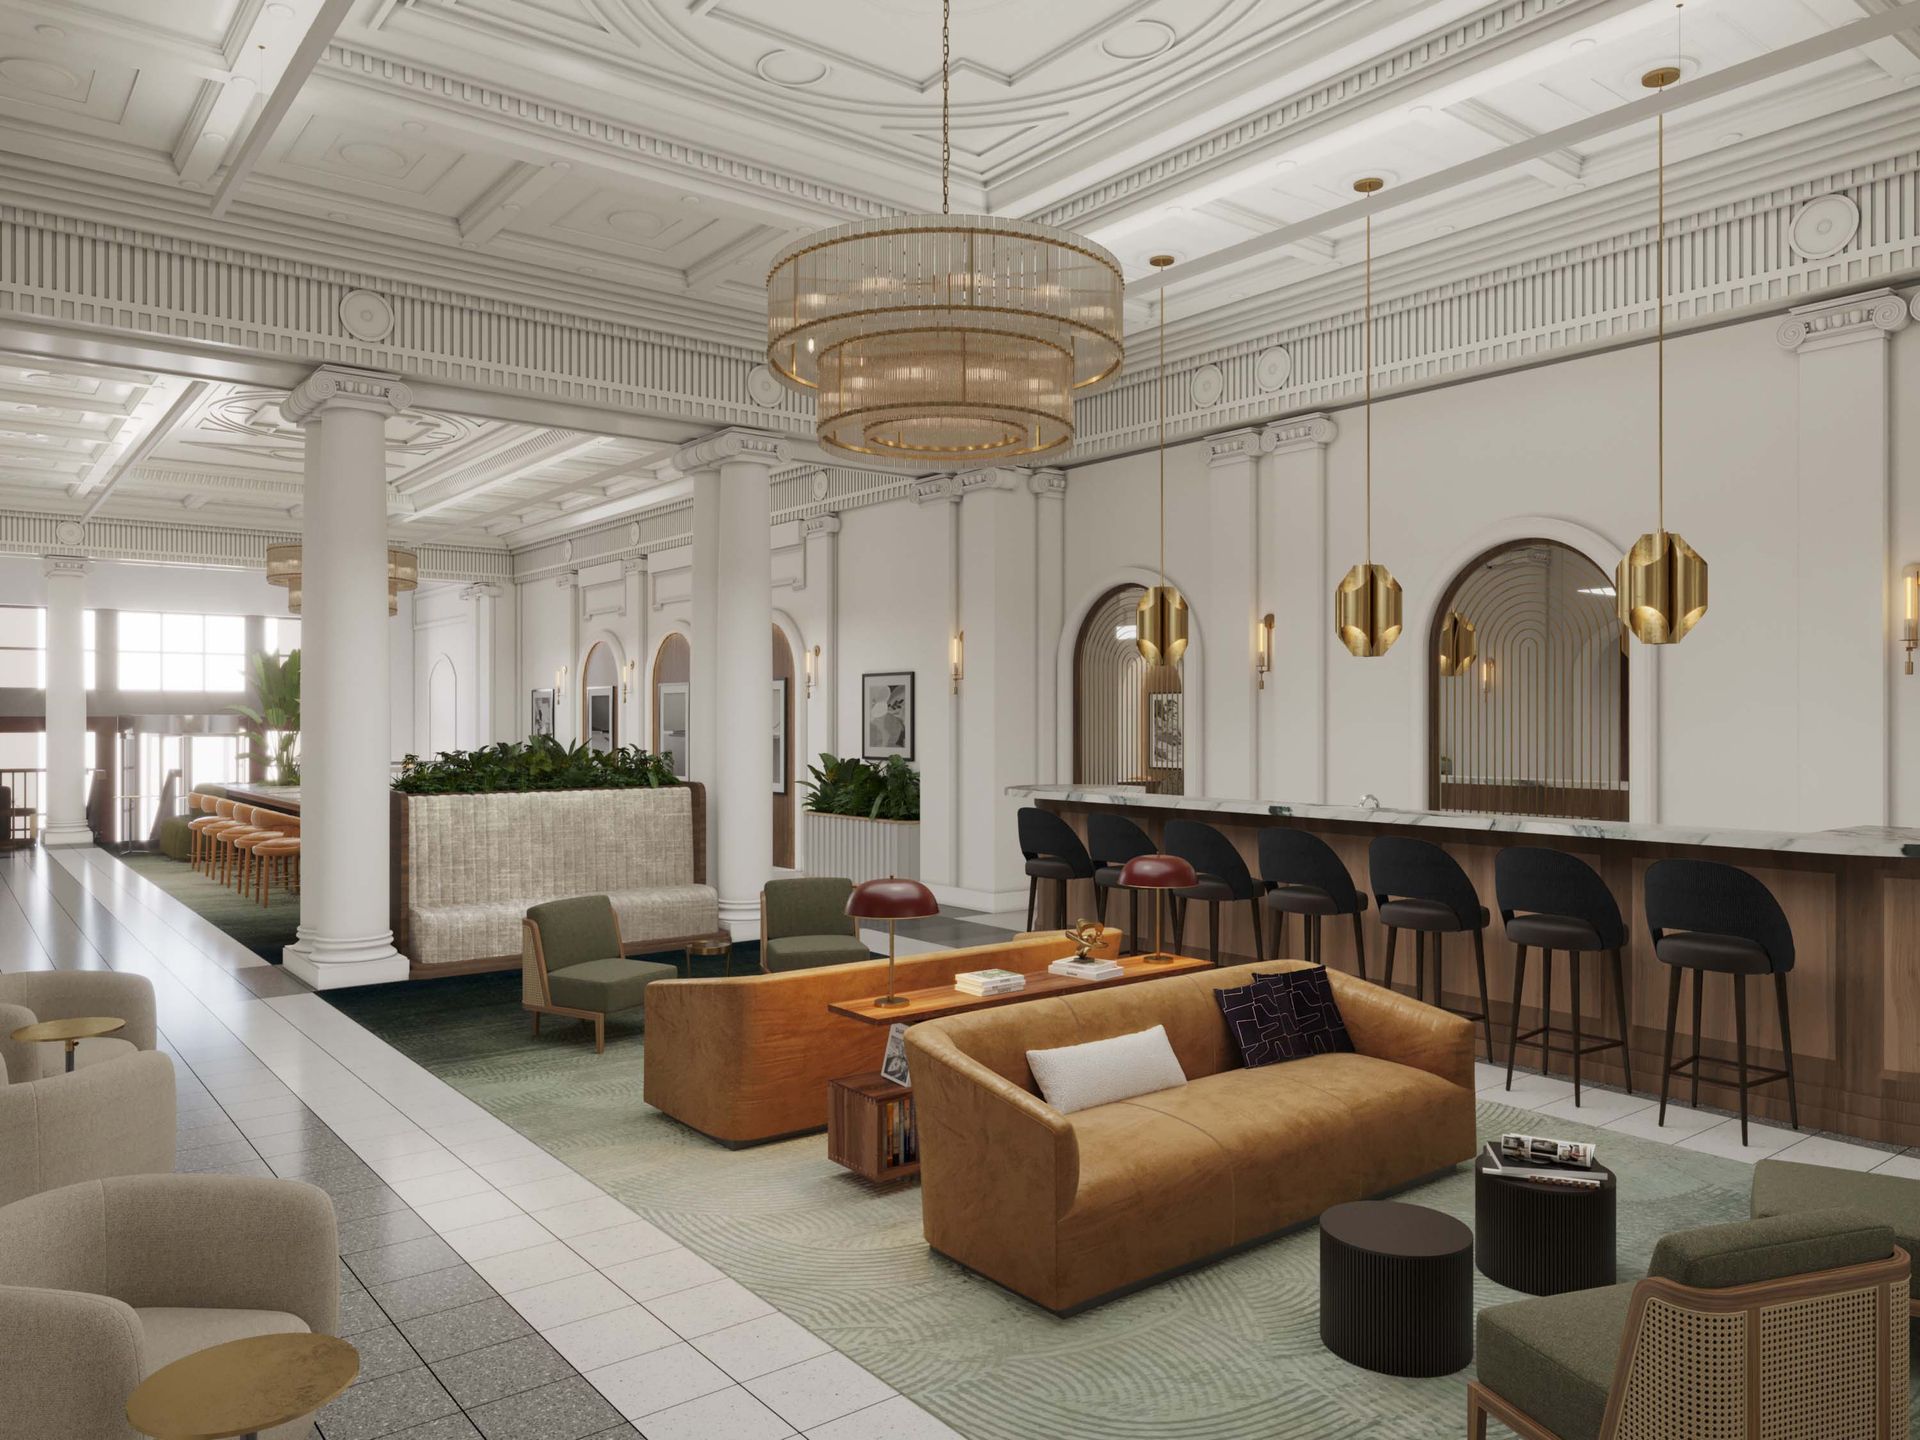 An artist's impression of a hotel lobby with a couch, chairs, and a bar at The Belmont by Reside.